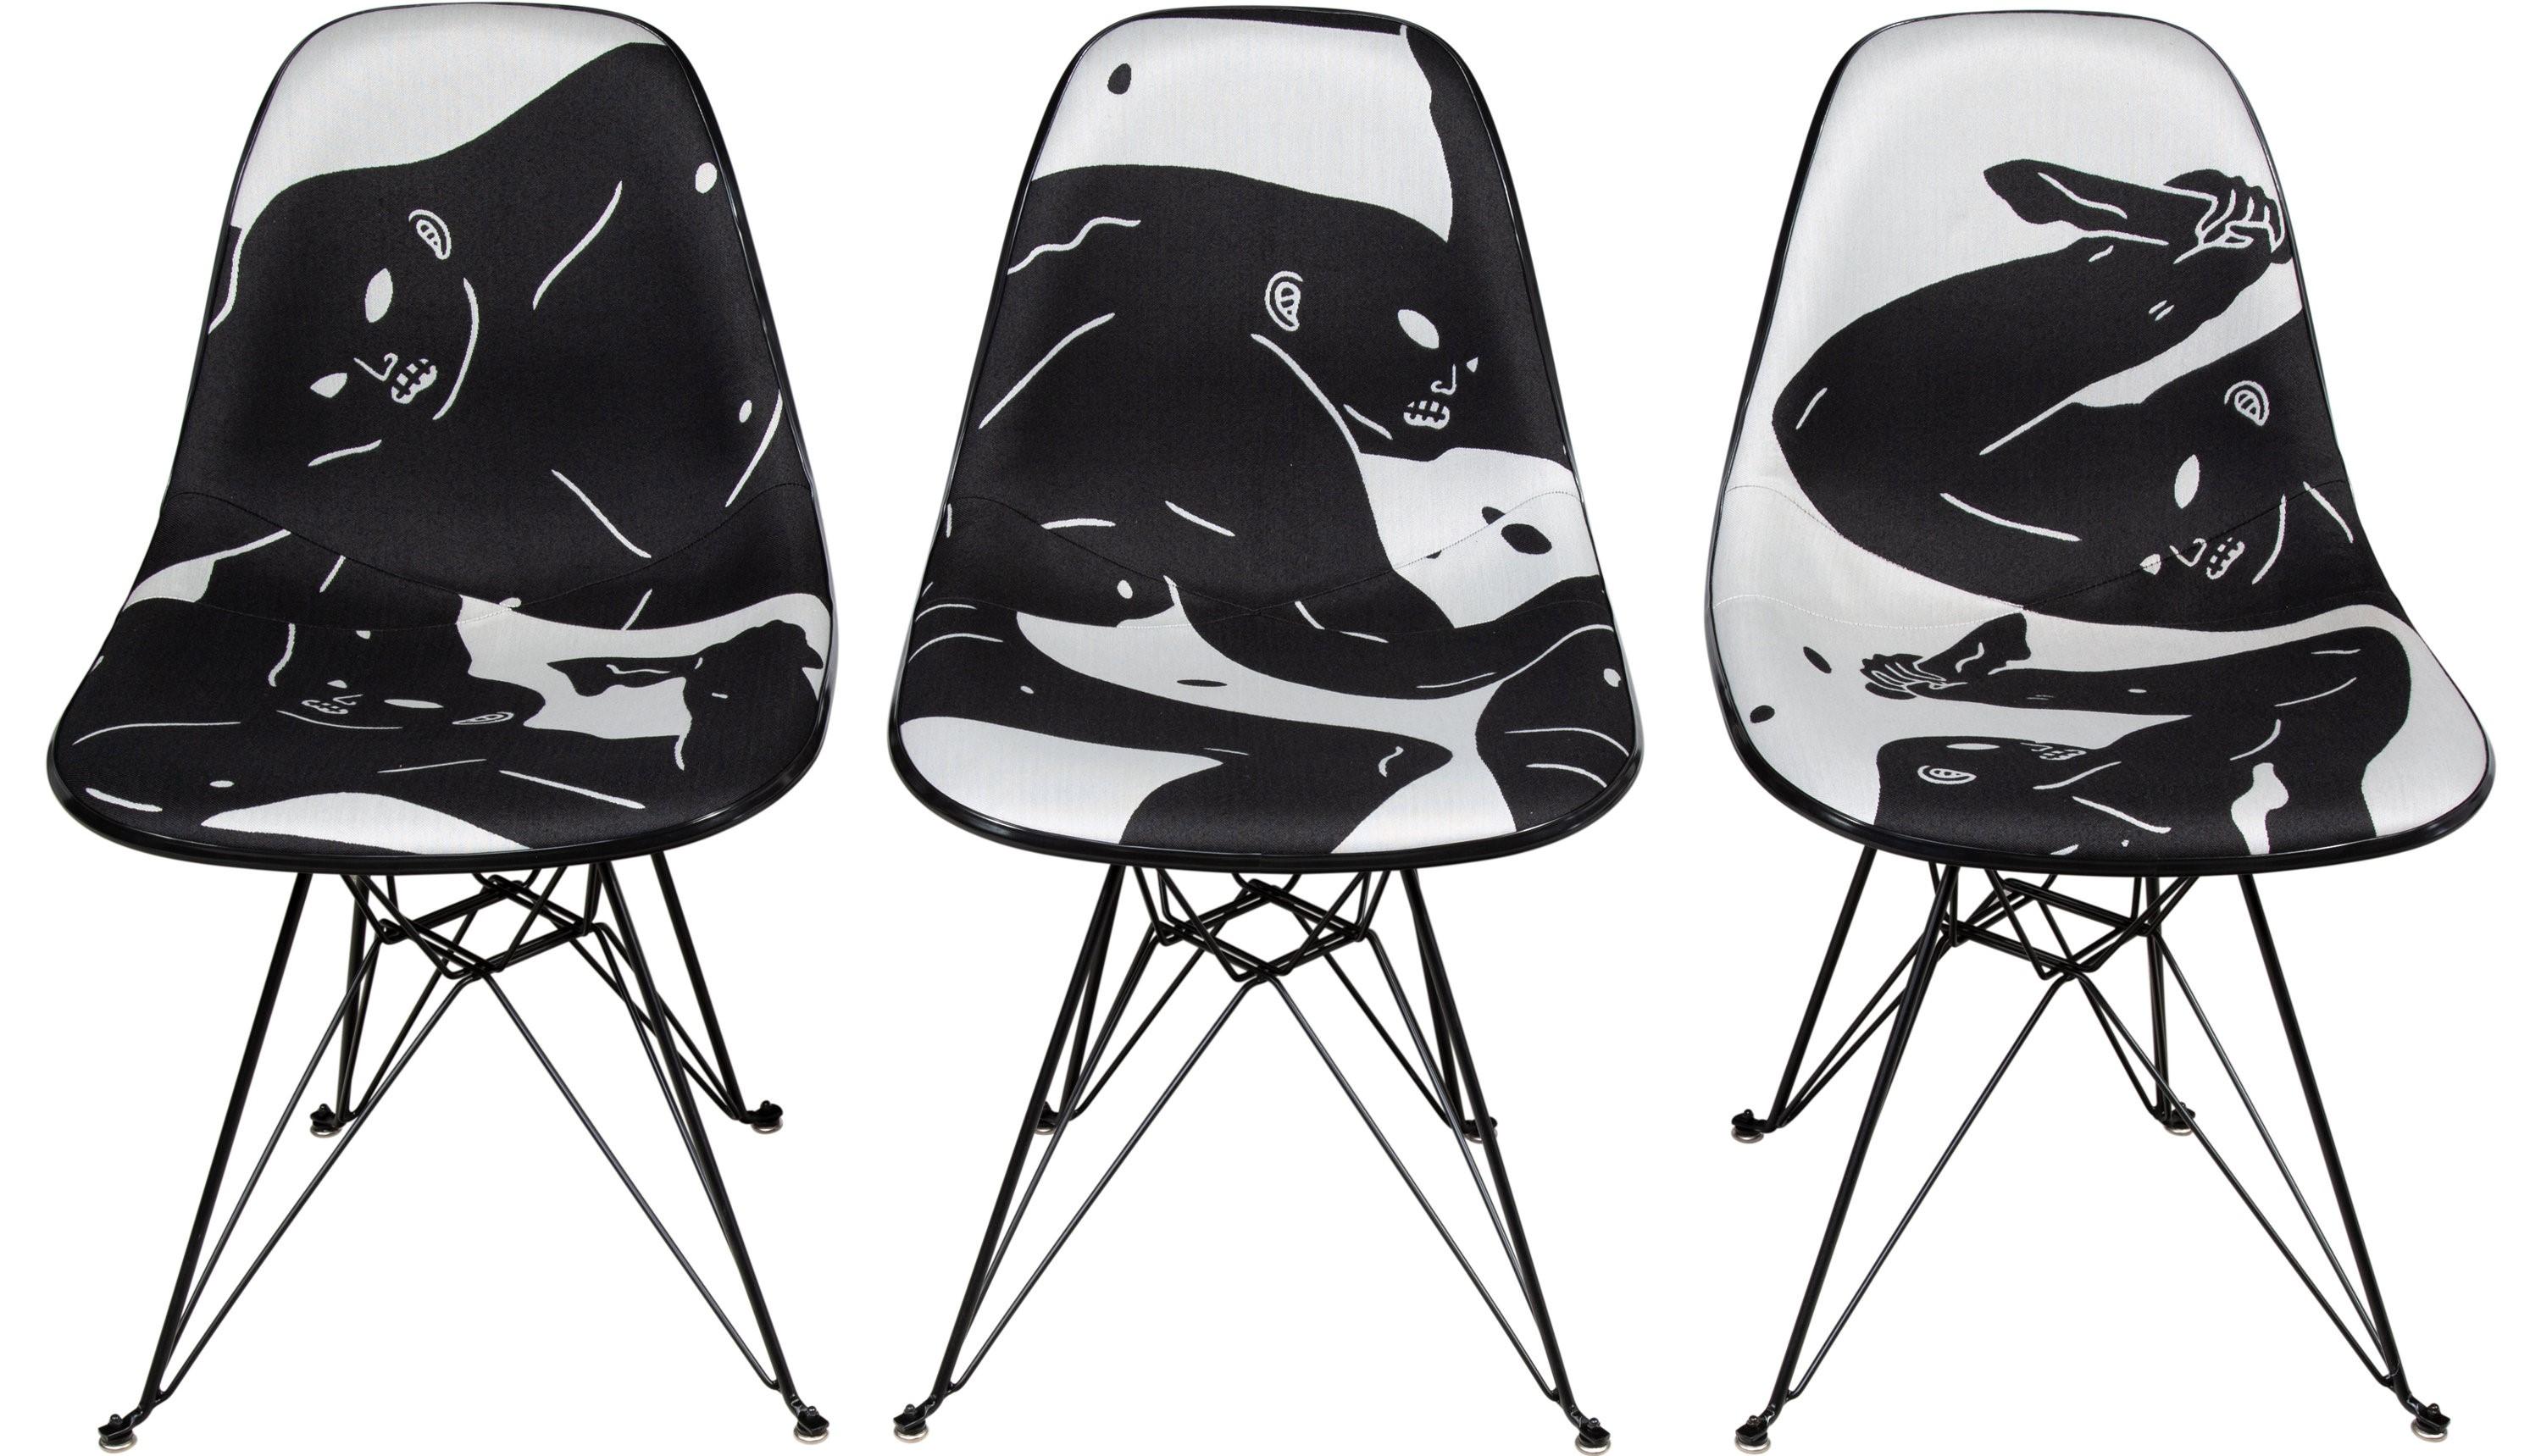 Museum of Contemporary Art Denver X Modernica Full Set of 3 Chairs Henry Eames